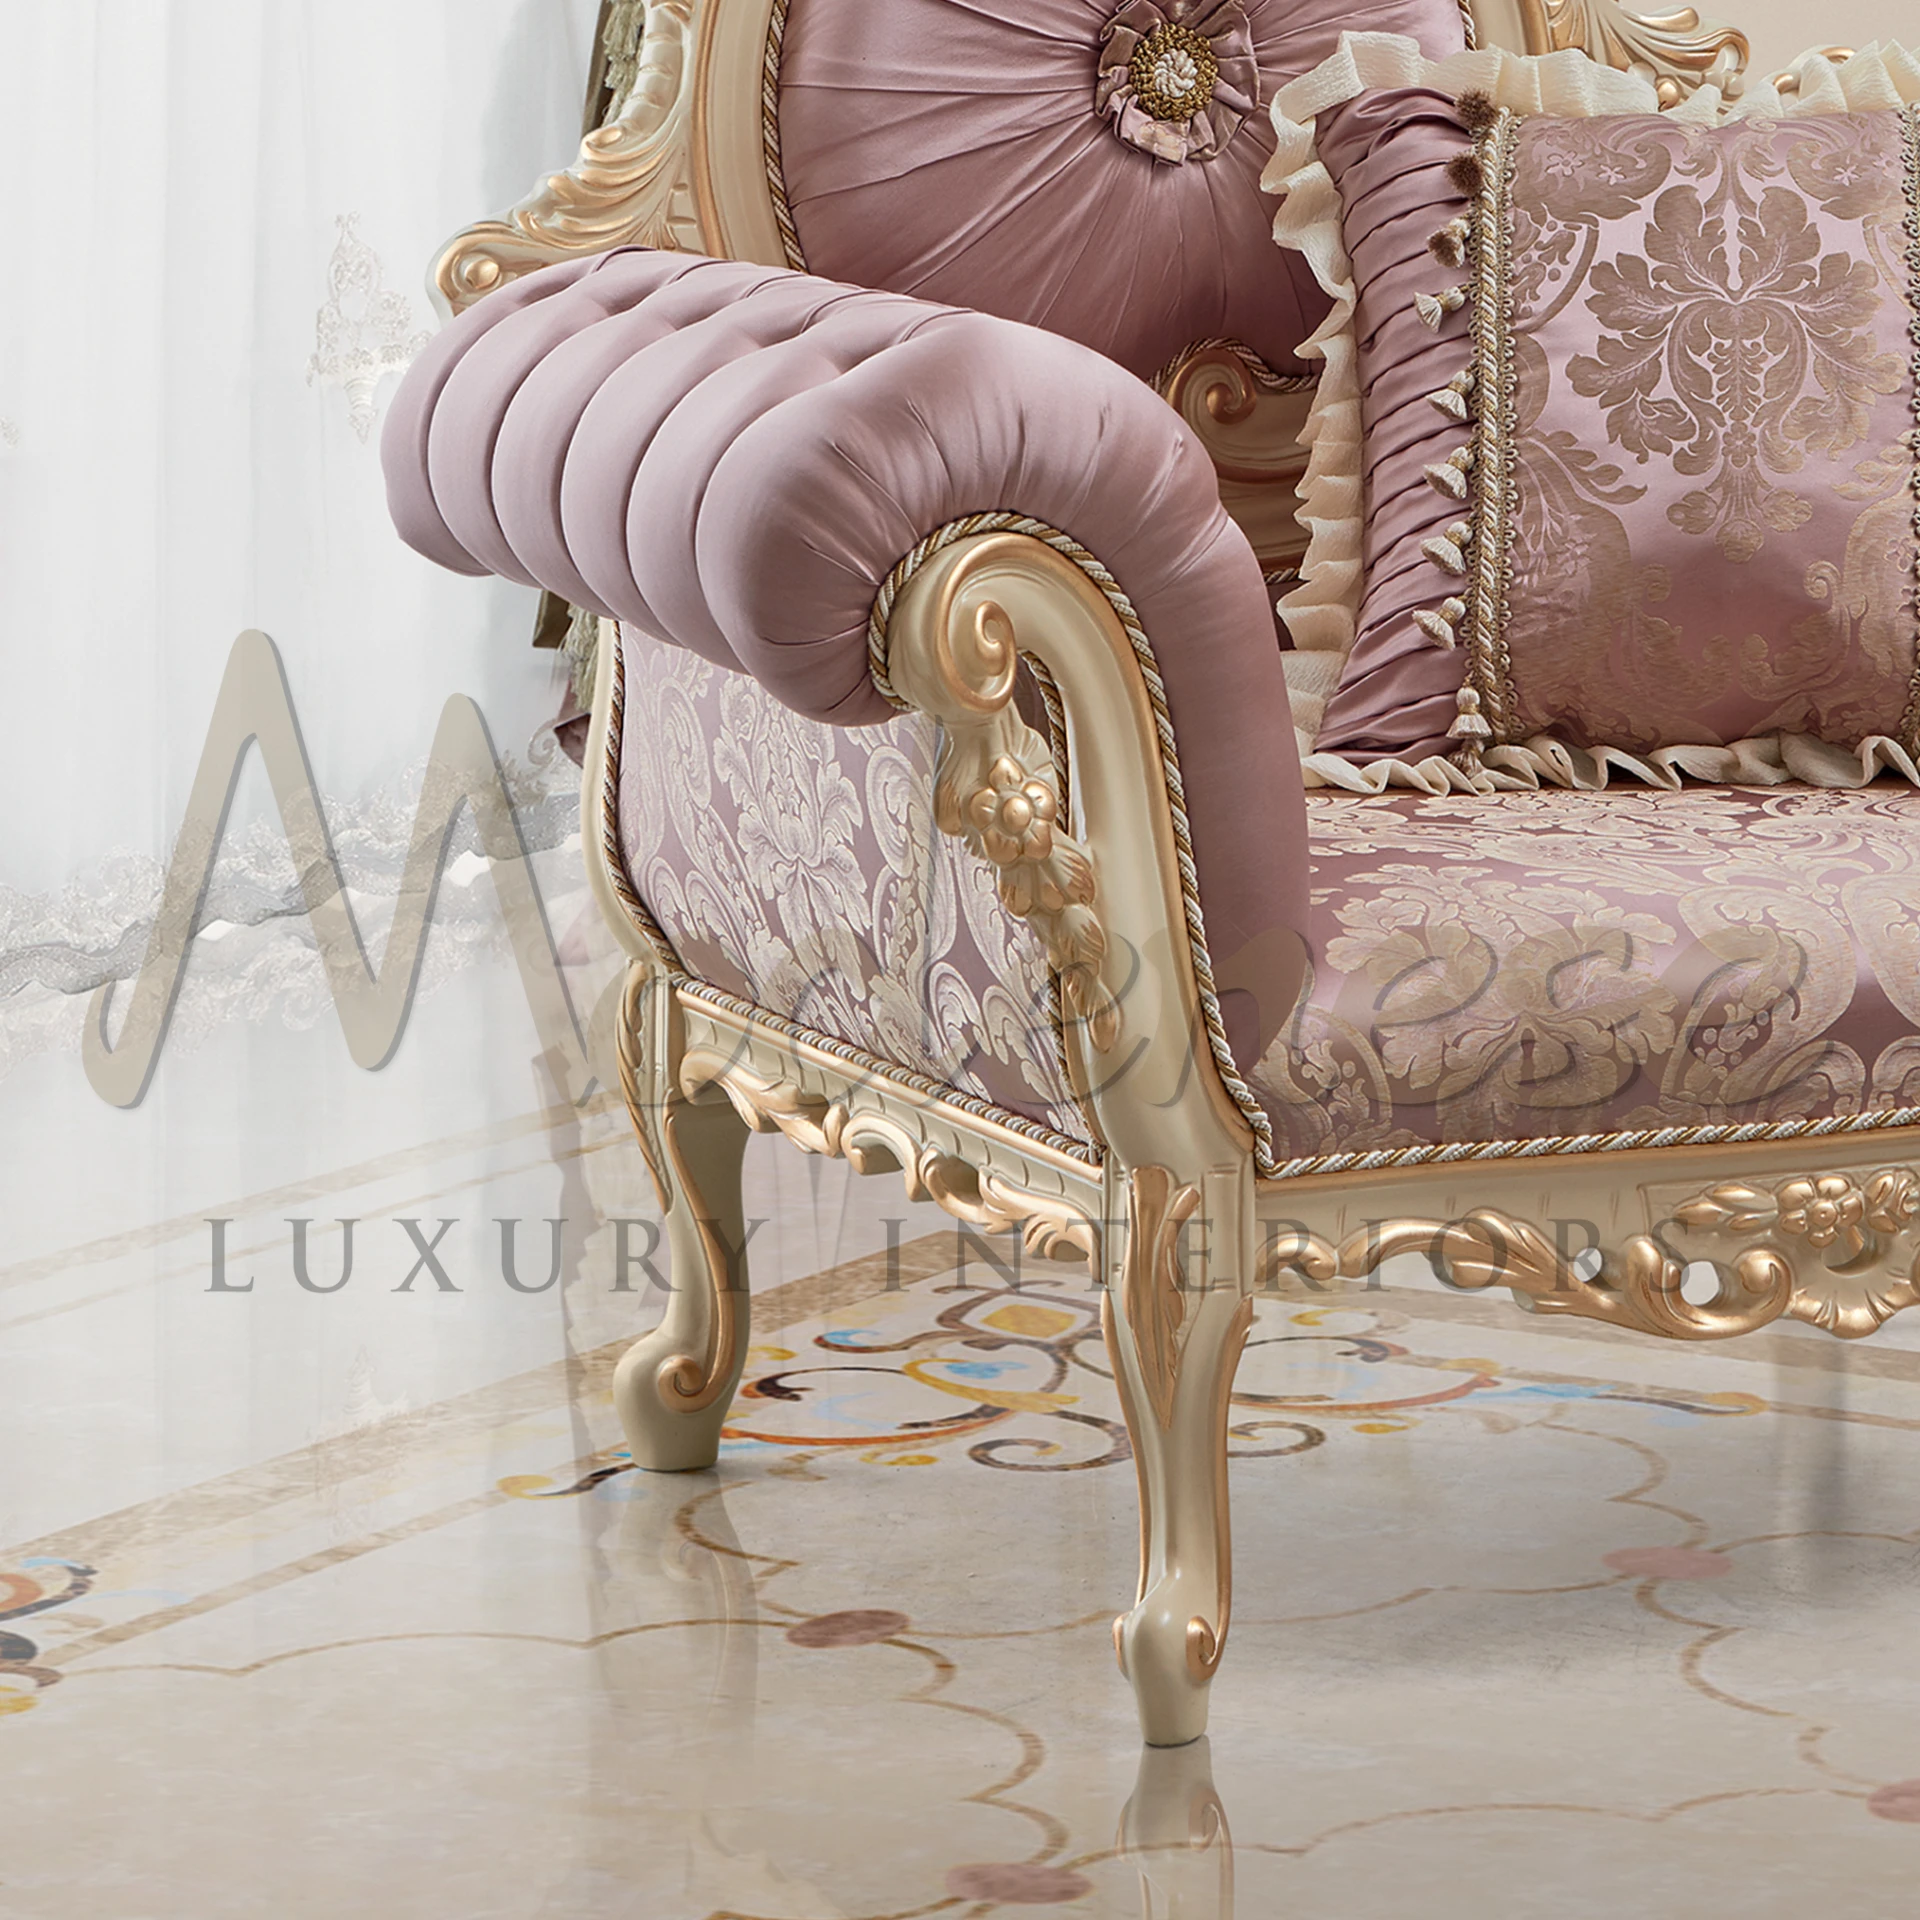 Timeless Elegant Victorian Armchair with brocade fabric and carved wood accents, embodying the sophistication of the Victorian era.
